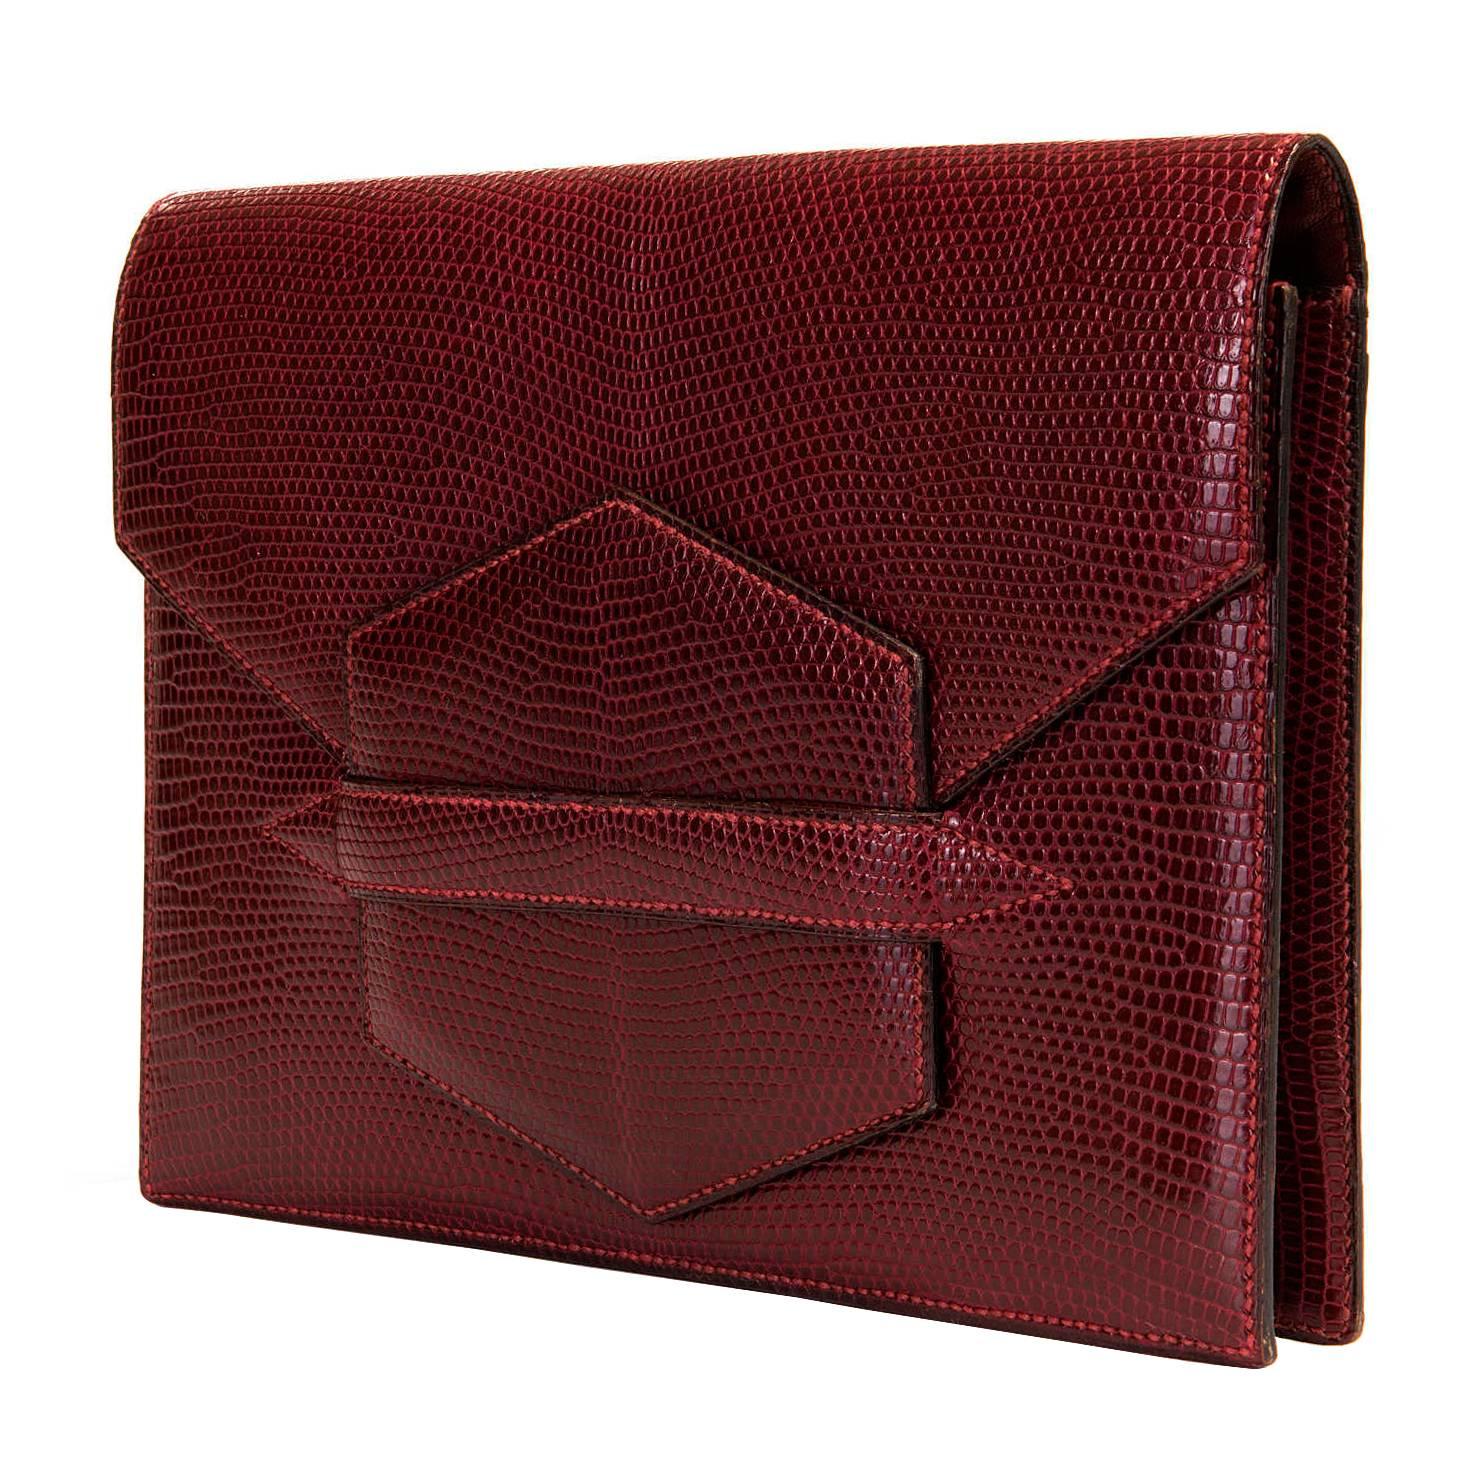 TRES CHIC Vintage Hermes 'Faco' Burgundy Lizard Clutch Bag in Pristine Condition